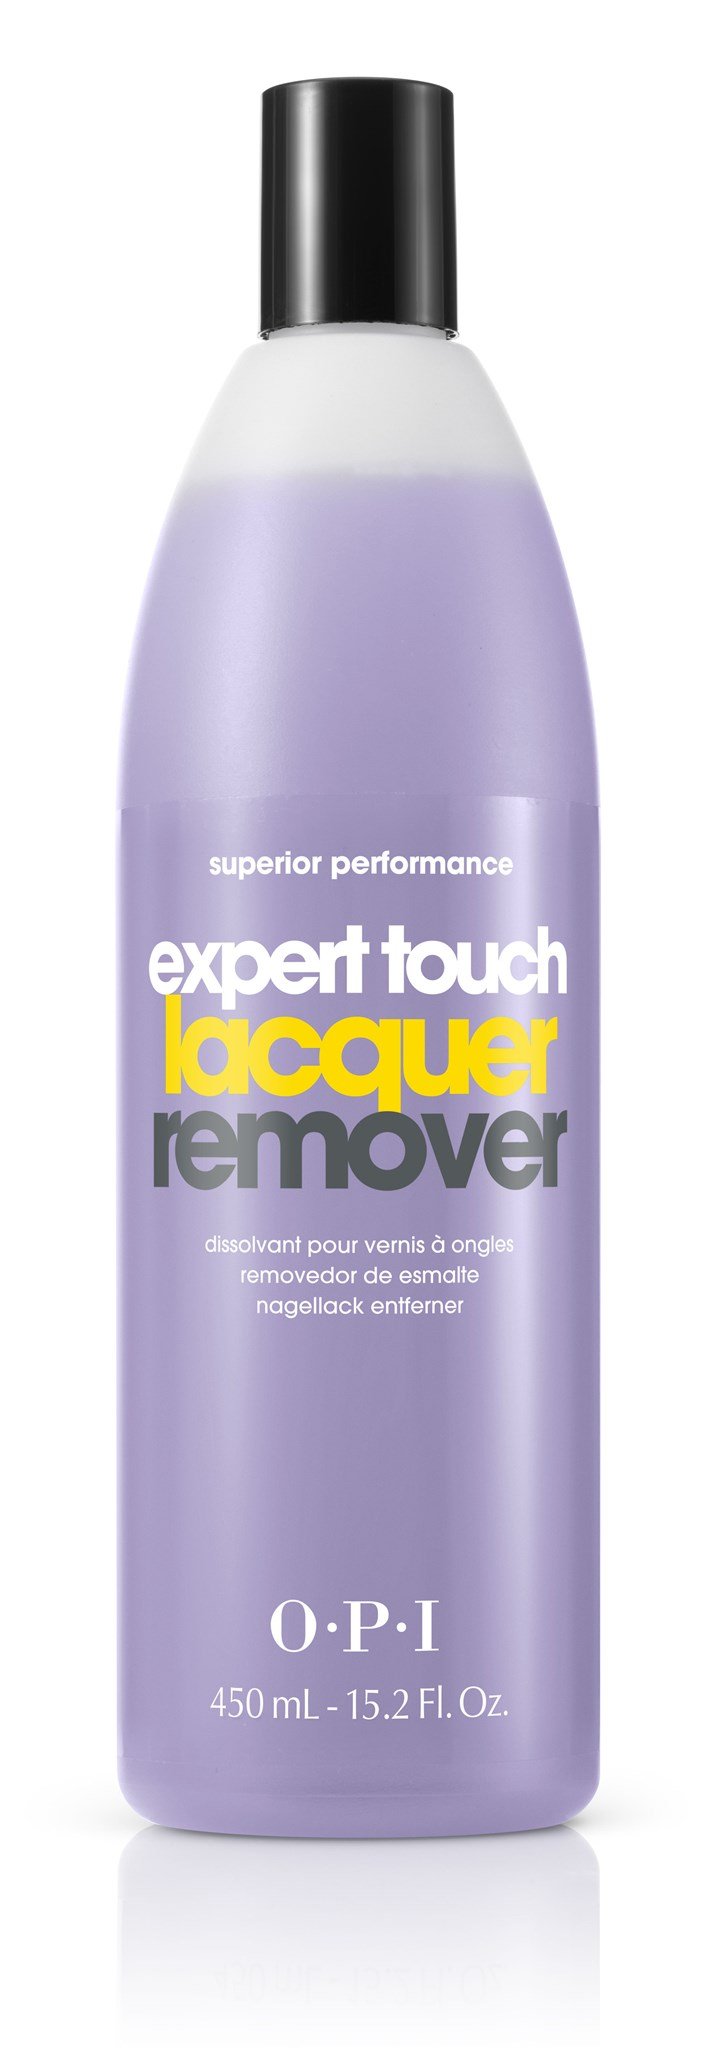 16oz Expert Touch Lacquer Remover